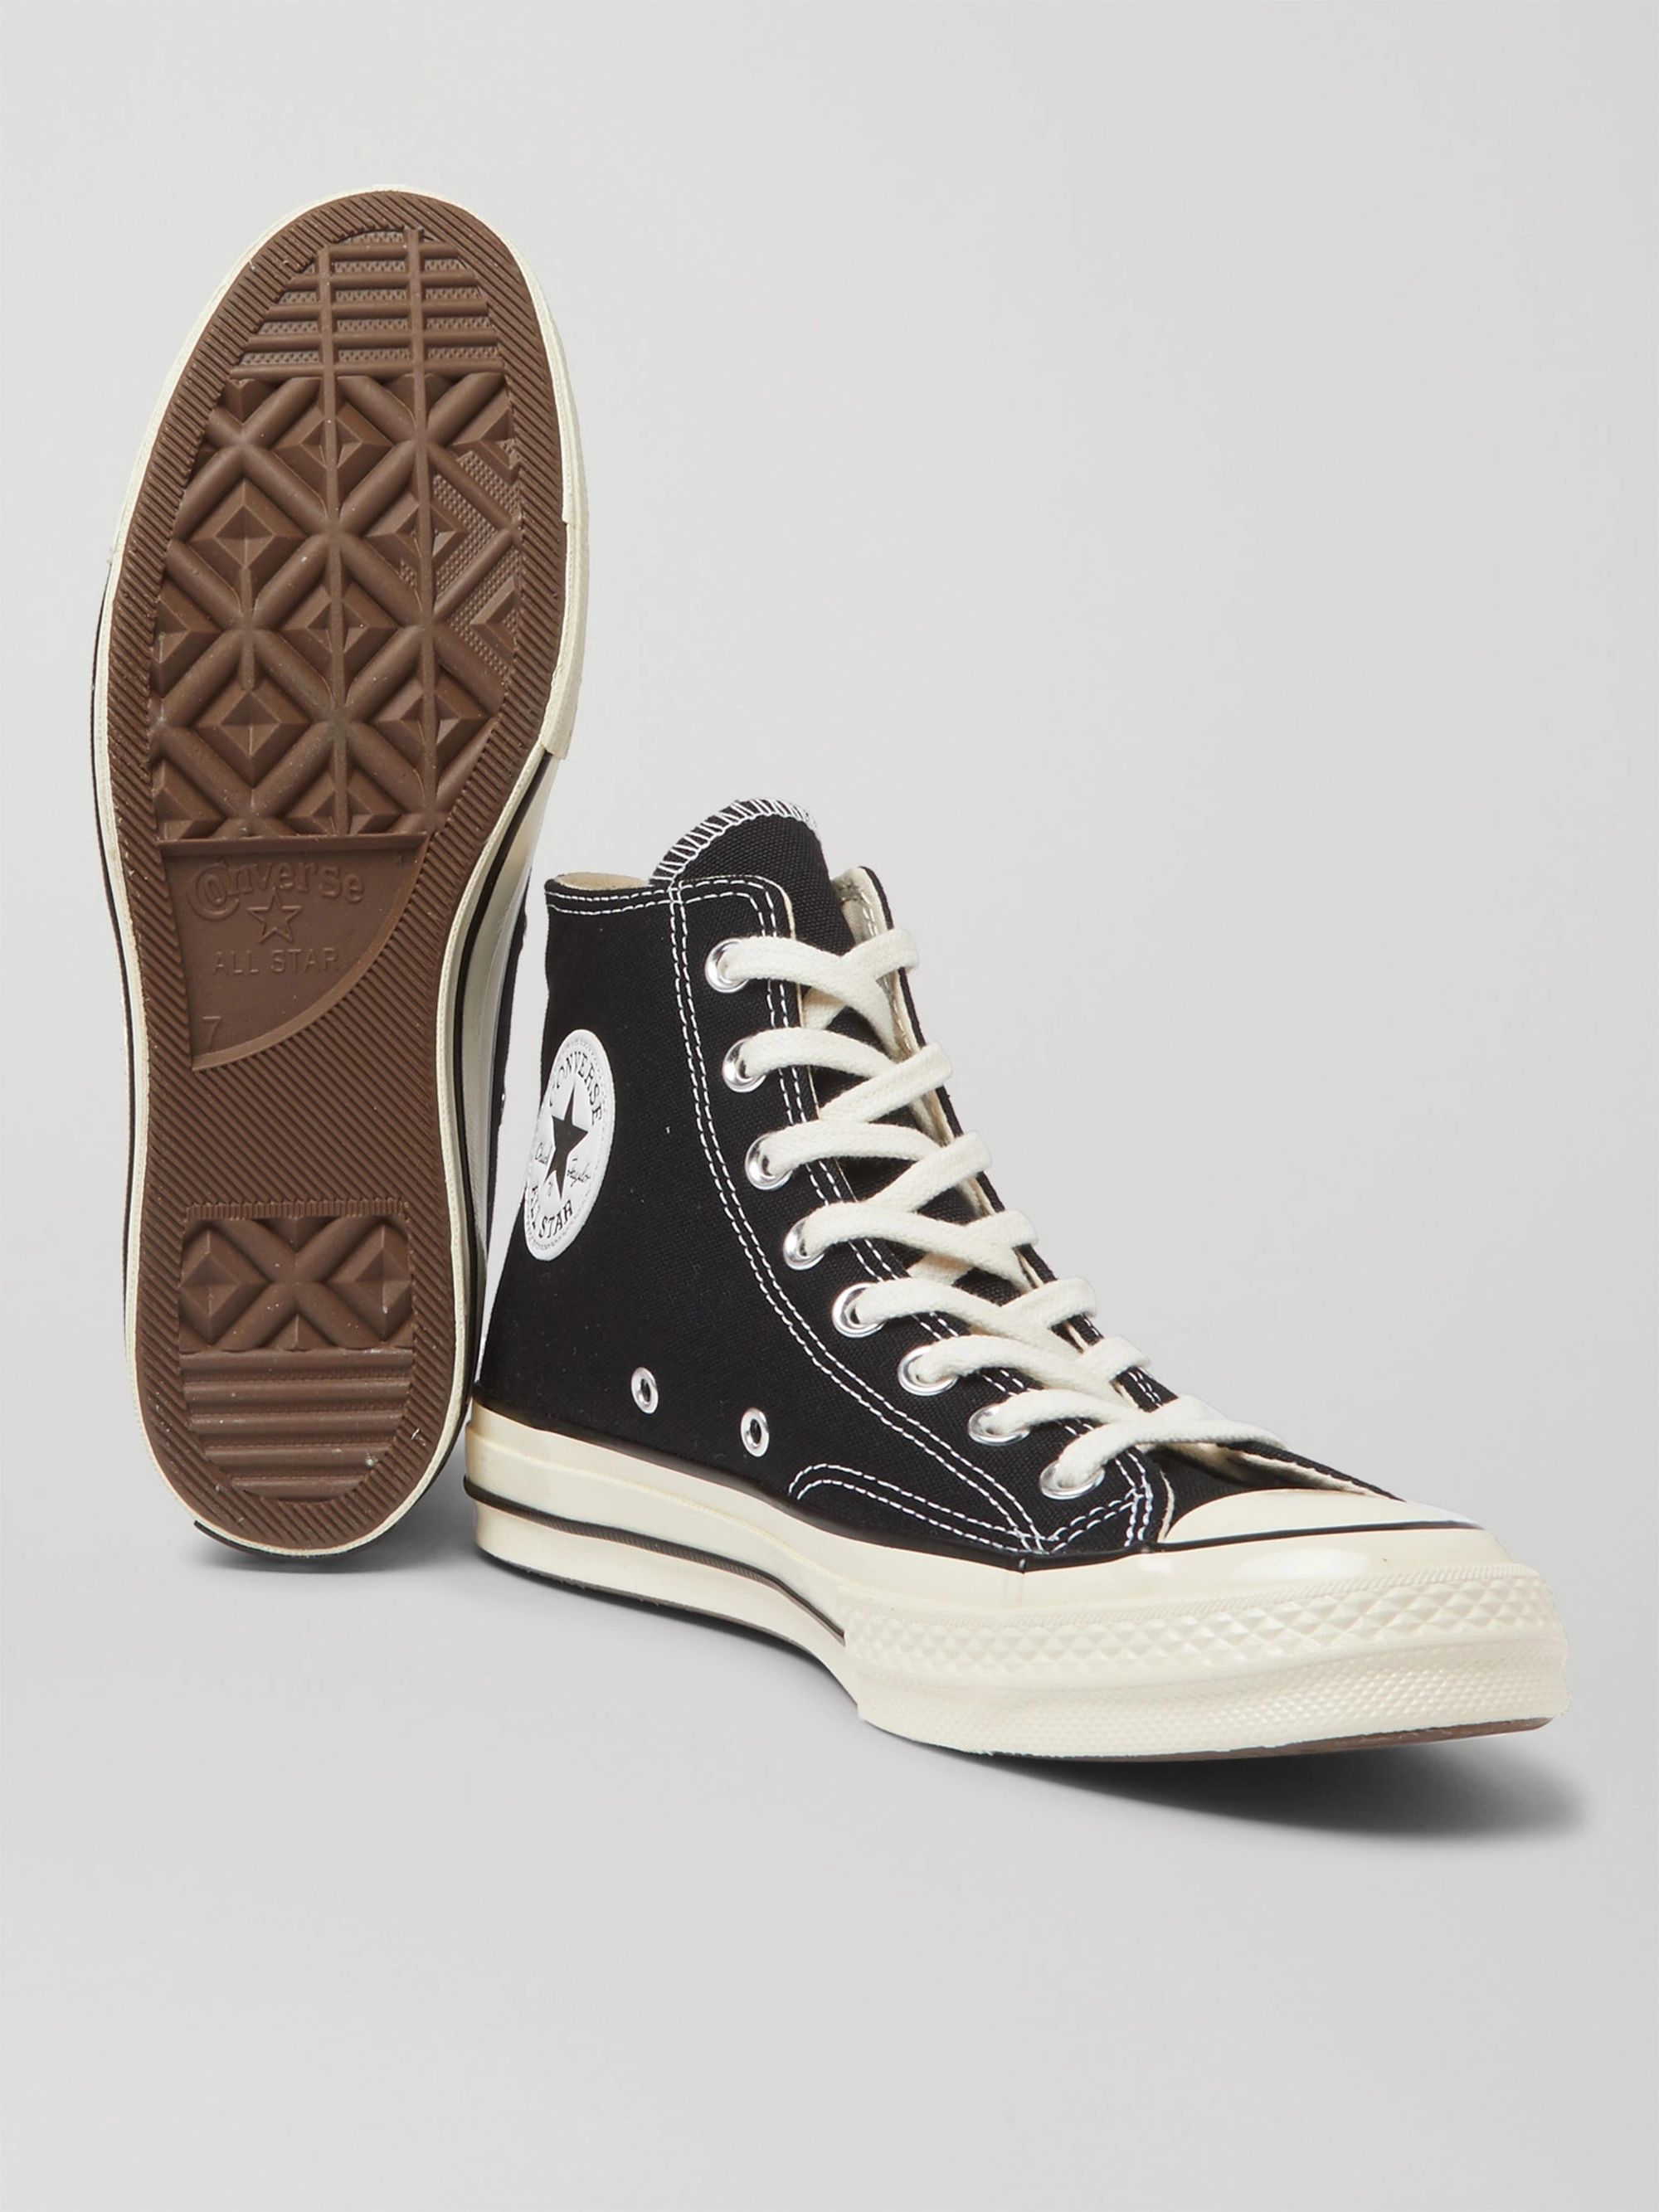 black and brown converse high tops